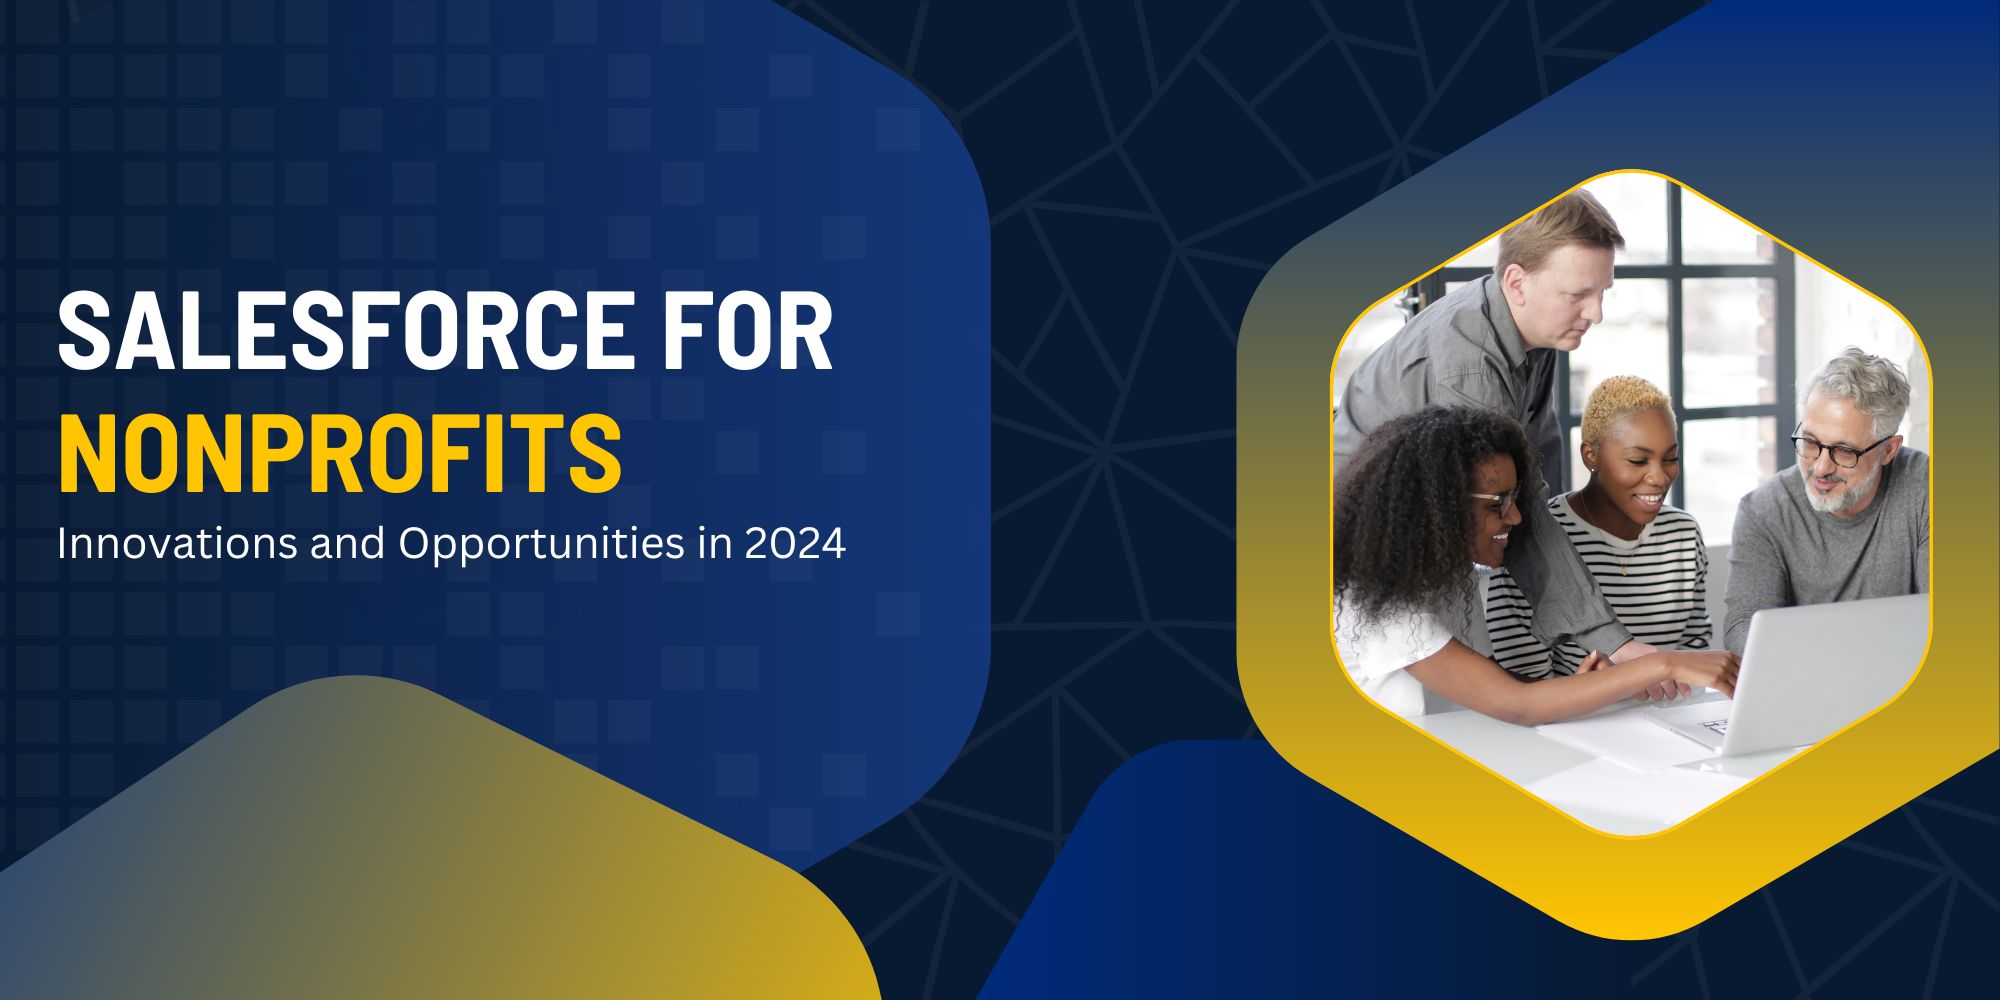 Salesforce for Nonprofits: Innovations and Opportunities in 2024